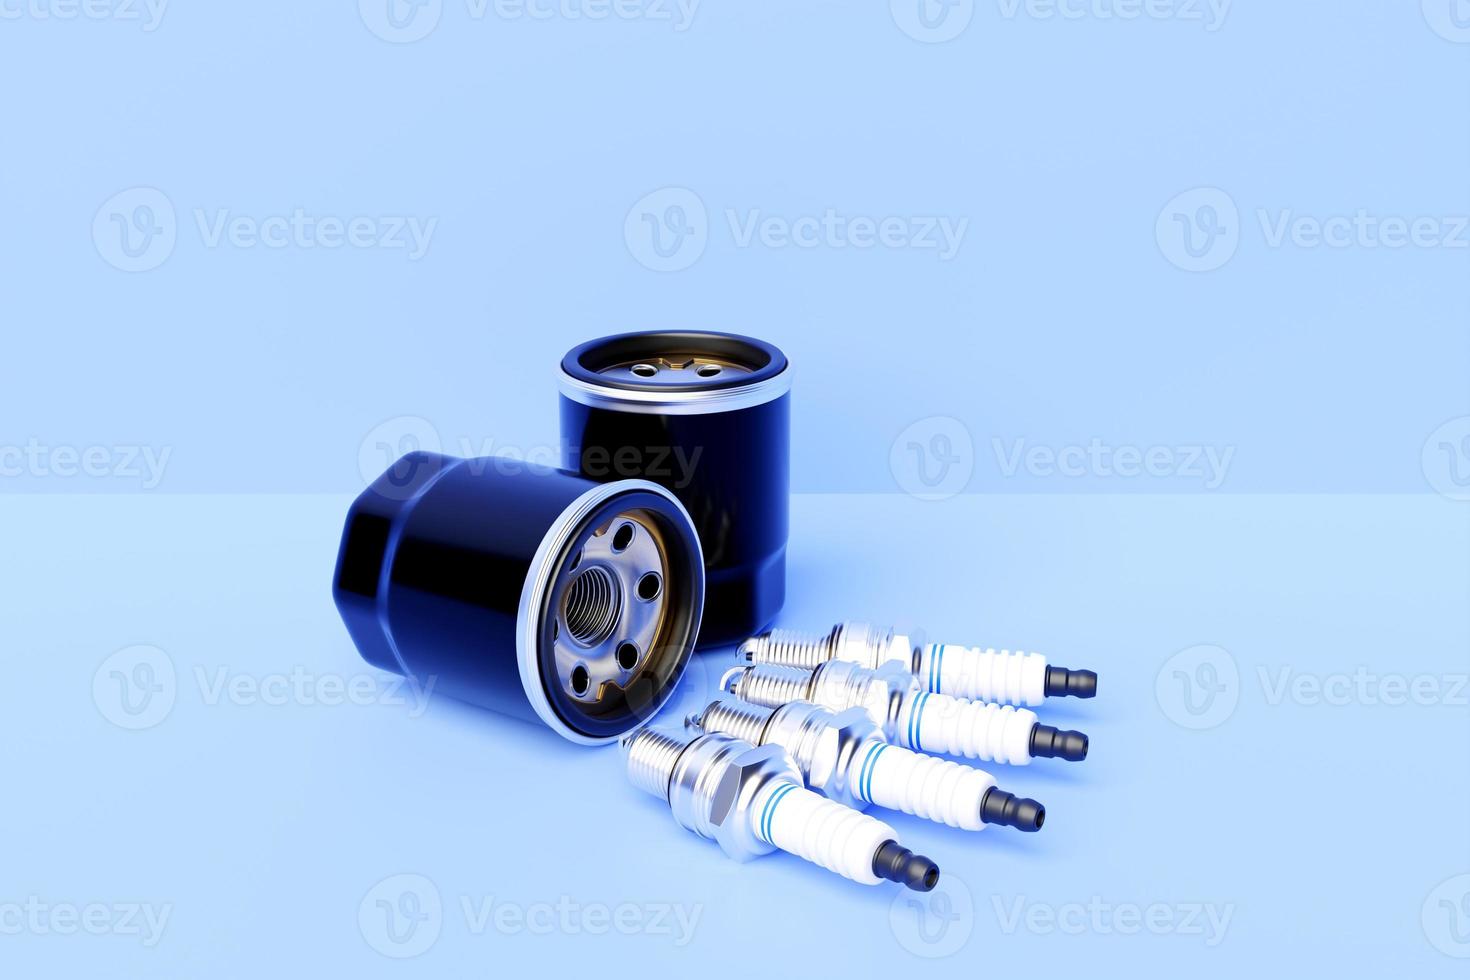 Black fuel filter car and spark plugs on blue background. 3d illustration. Car Repair Parts photo